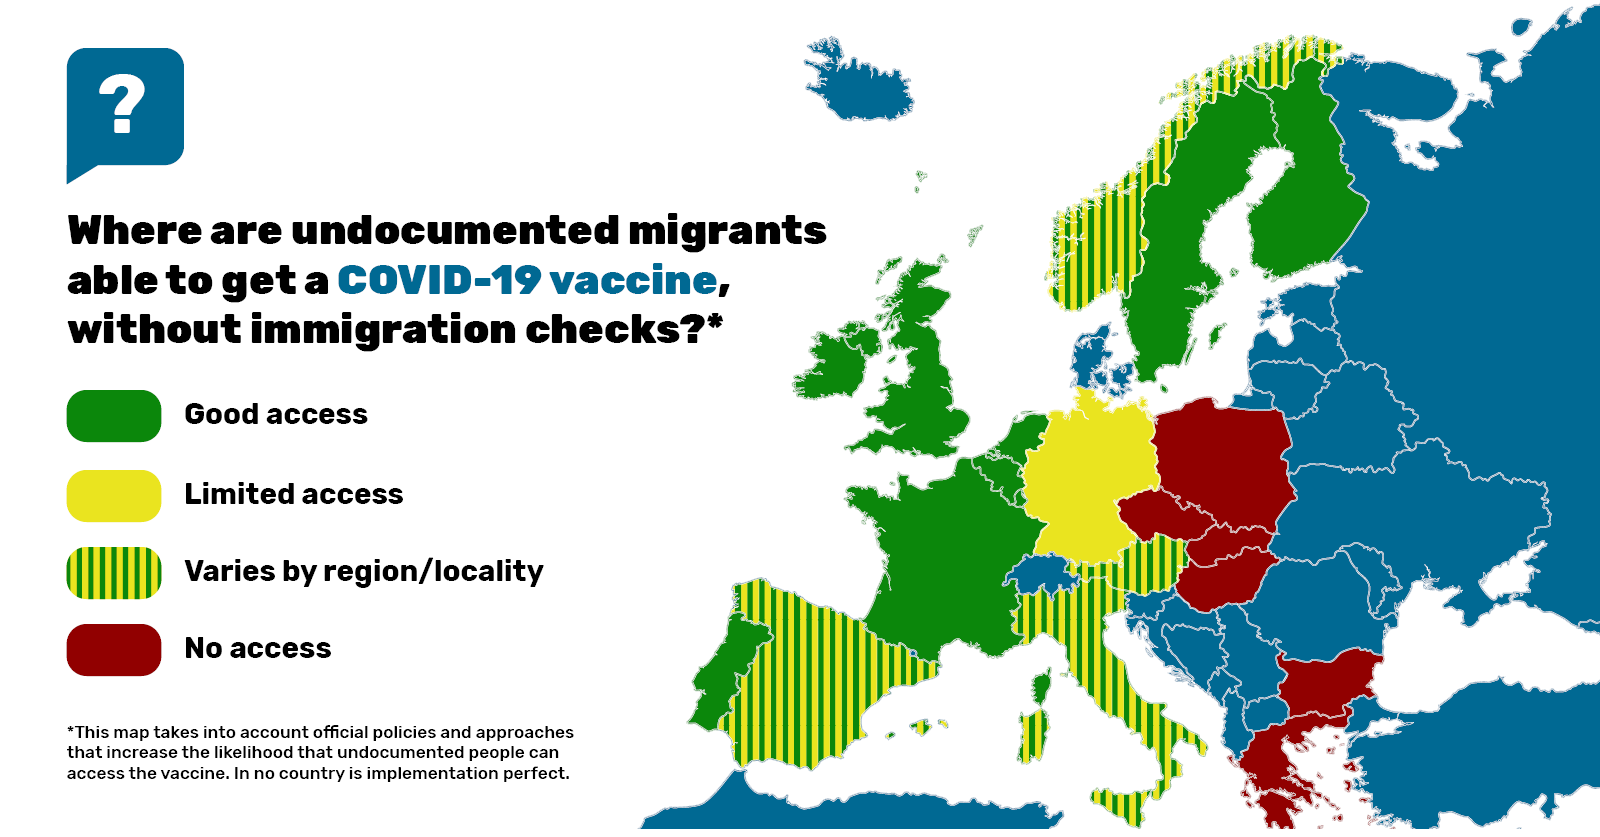 Map of Europe showing where undocumented migrants are able to get a COVID-19 vaccine, without immigration checks